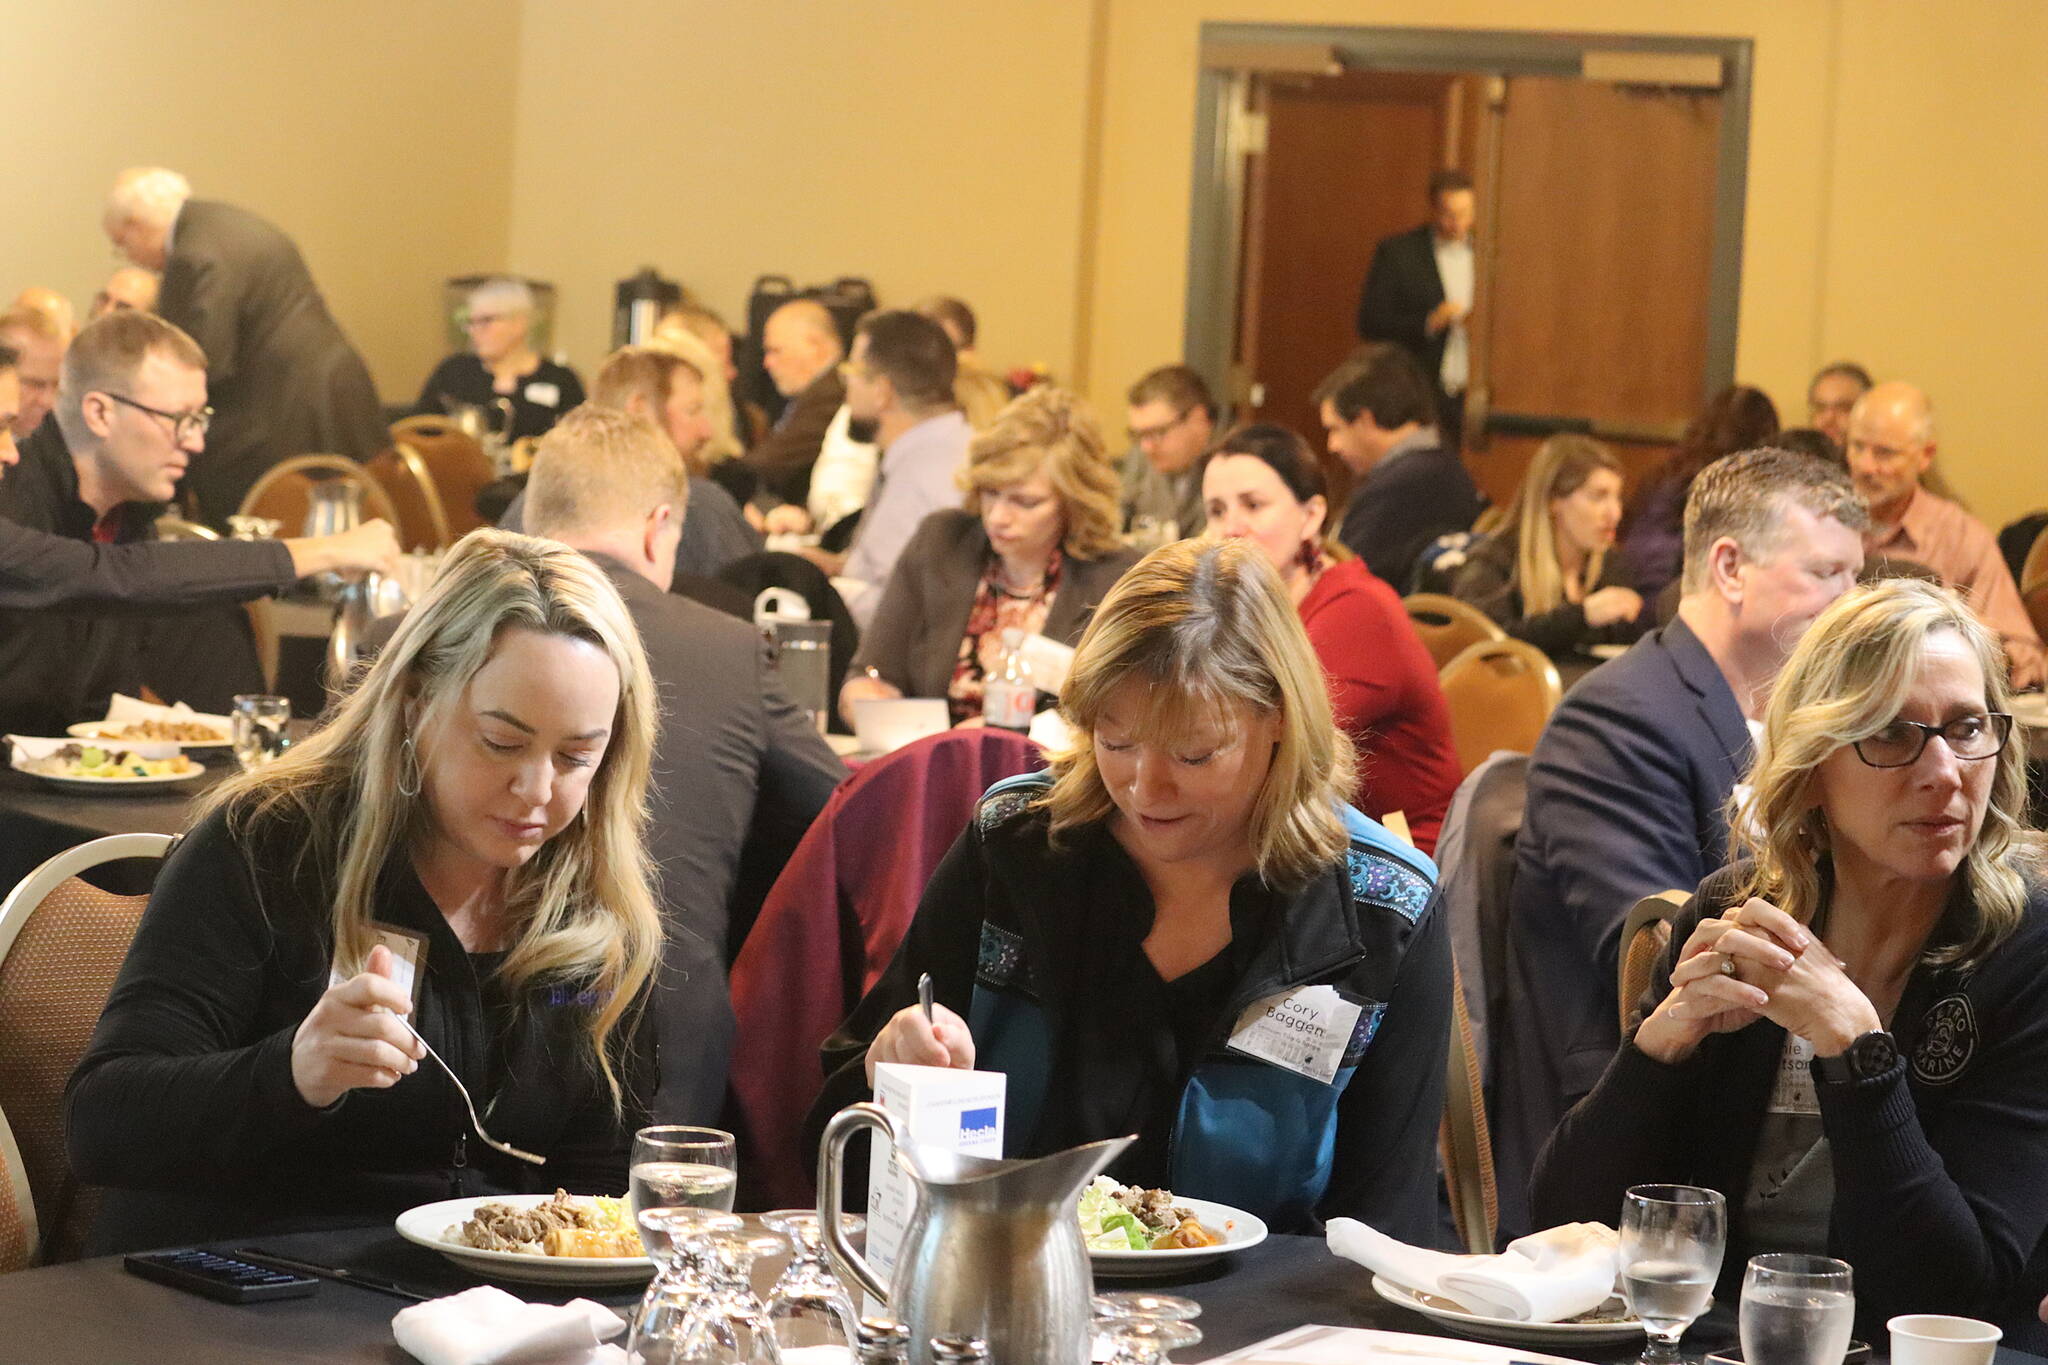 Mark Sabbatini / Juneau Empire 
Members of the Alaska Chamber of Commerce eat a Filipino lunch during the Juneau Chamber’s weekly luncheon Thursday at the Baranof Hotel prior to Gov. Mike Dunleavy appearance as the week’s featured speaker.